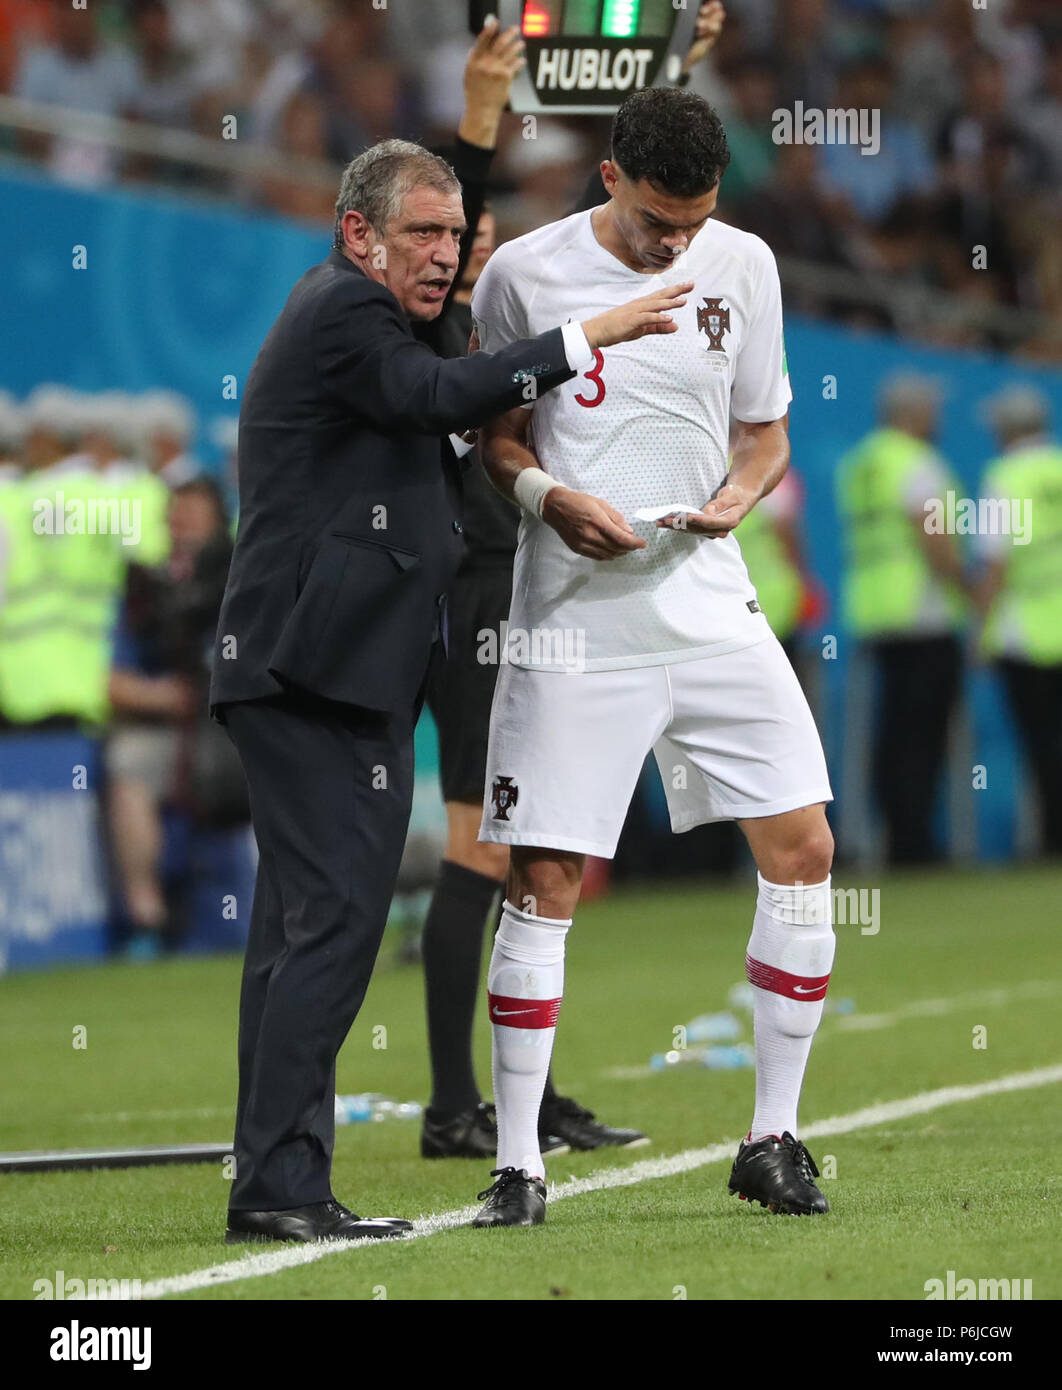 Sochi, Russia. 30th June, 2018. Head coach Fernando Santos (L) of Portugal gives instructions to Pepe during the 2018 FIFA World Cup round of 16 match between Uruguay and Portugal in Sochi, Russia, June 30, 2018. Uruguay won 2-1 and advanced to the quarter-final. Credit: Ye Pingfan/Xinhua/Alamy Live News Stock Photo